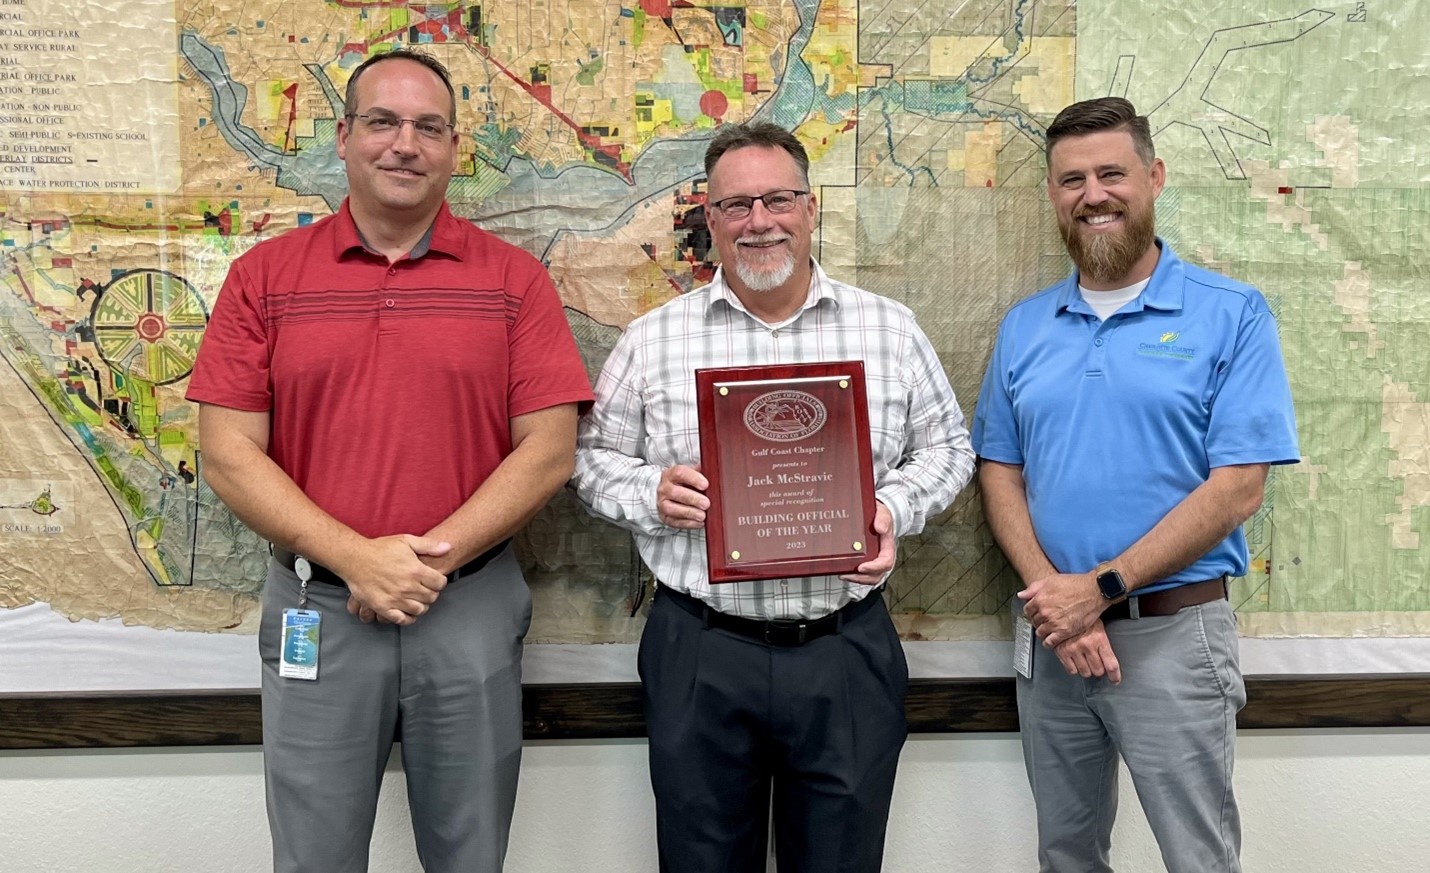 Left to right: Charlotte County Community Development Director Ben Bailey, Deputy Building Official Jack McStravic, Building Official and Floodplain Administrator Shawn McNulty